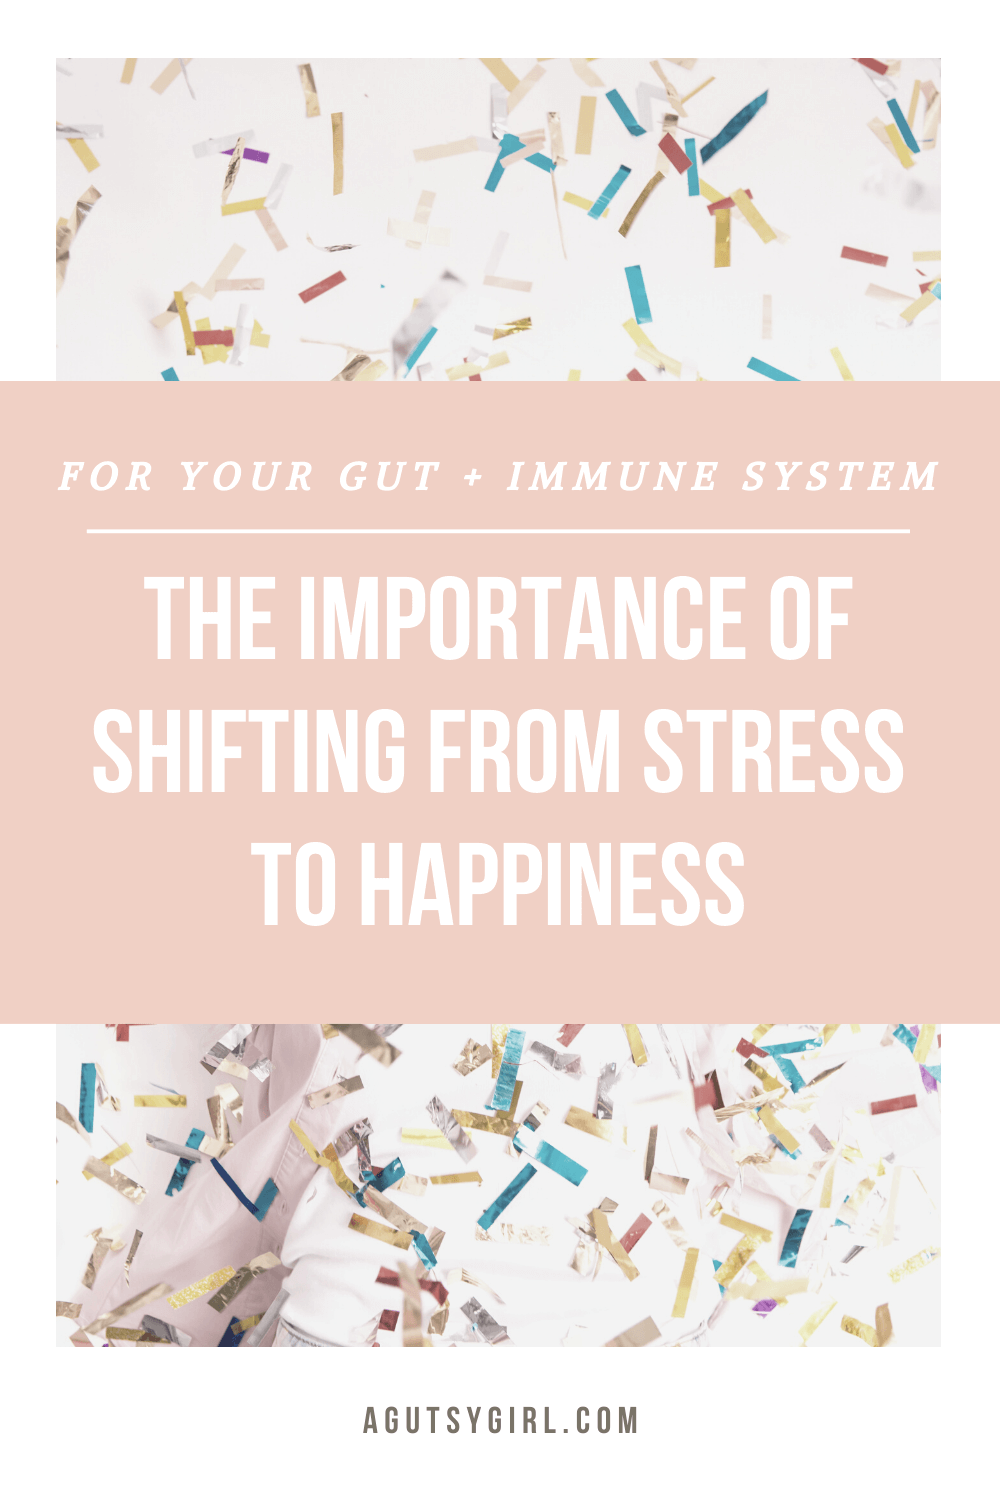 The Importance of Shifting from Stress to Happiness agutsygirl.com #guthealth #ibs #healthyliving #stress gut health immune